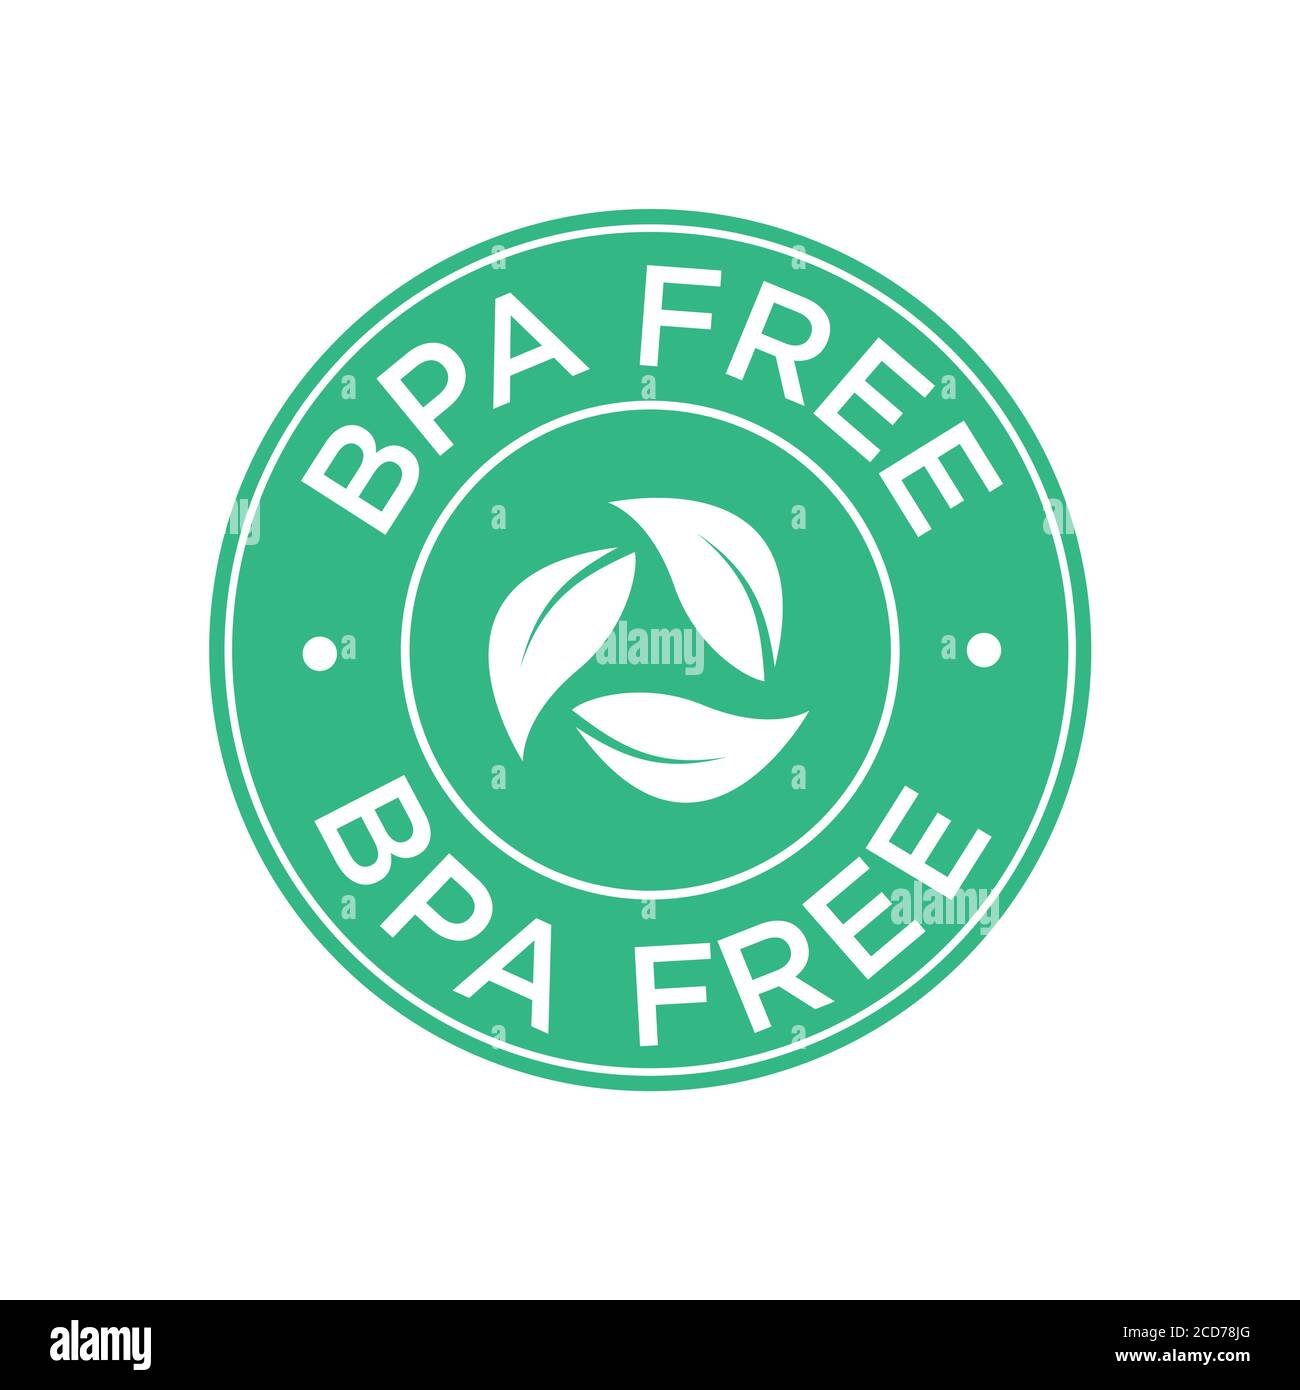 Bpa Free Bisphenol A And Phthalates Free Icon Vector Non Toxic Plastic Sign  For Graphic Design Logo Website Social Media Mobile App Ui Illustration  Stock Illustration - Download Image Now - iStock